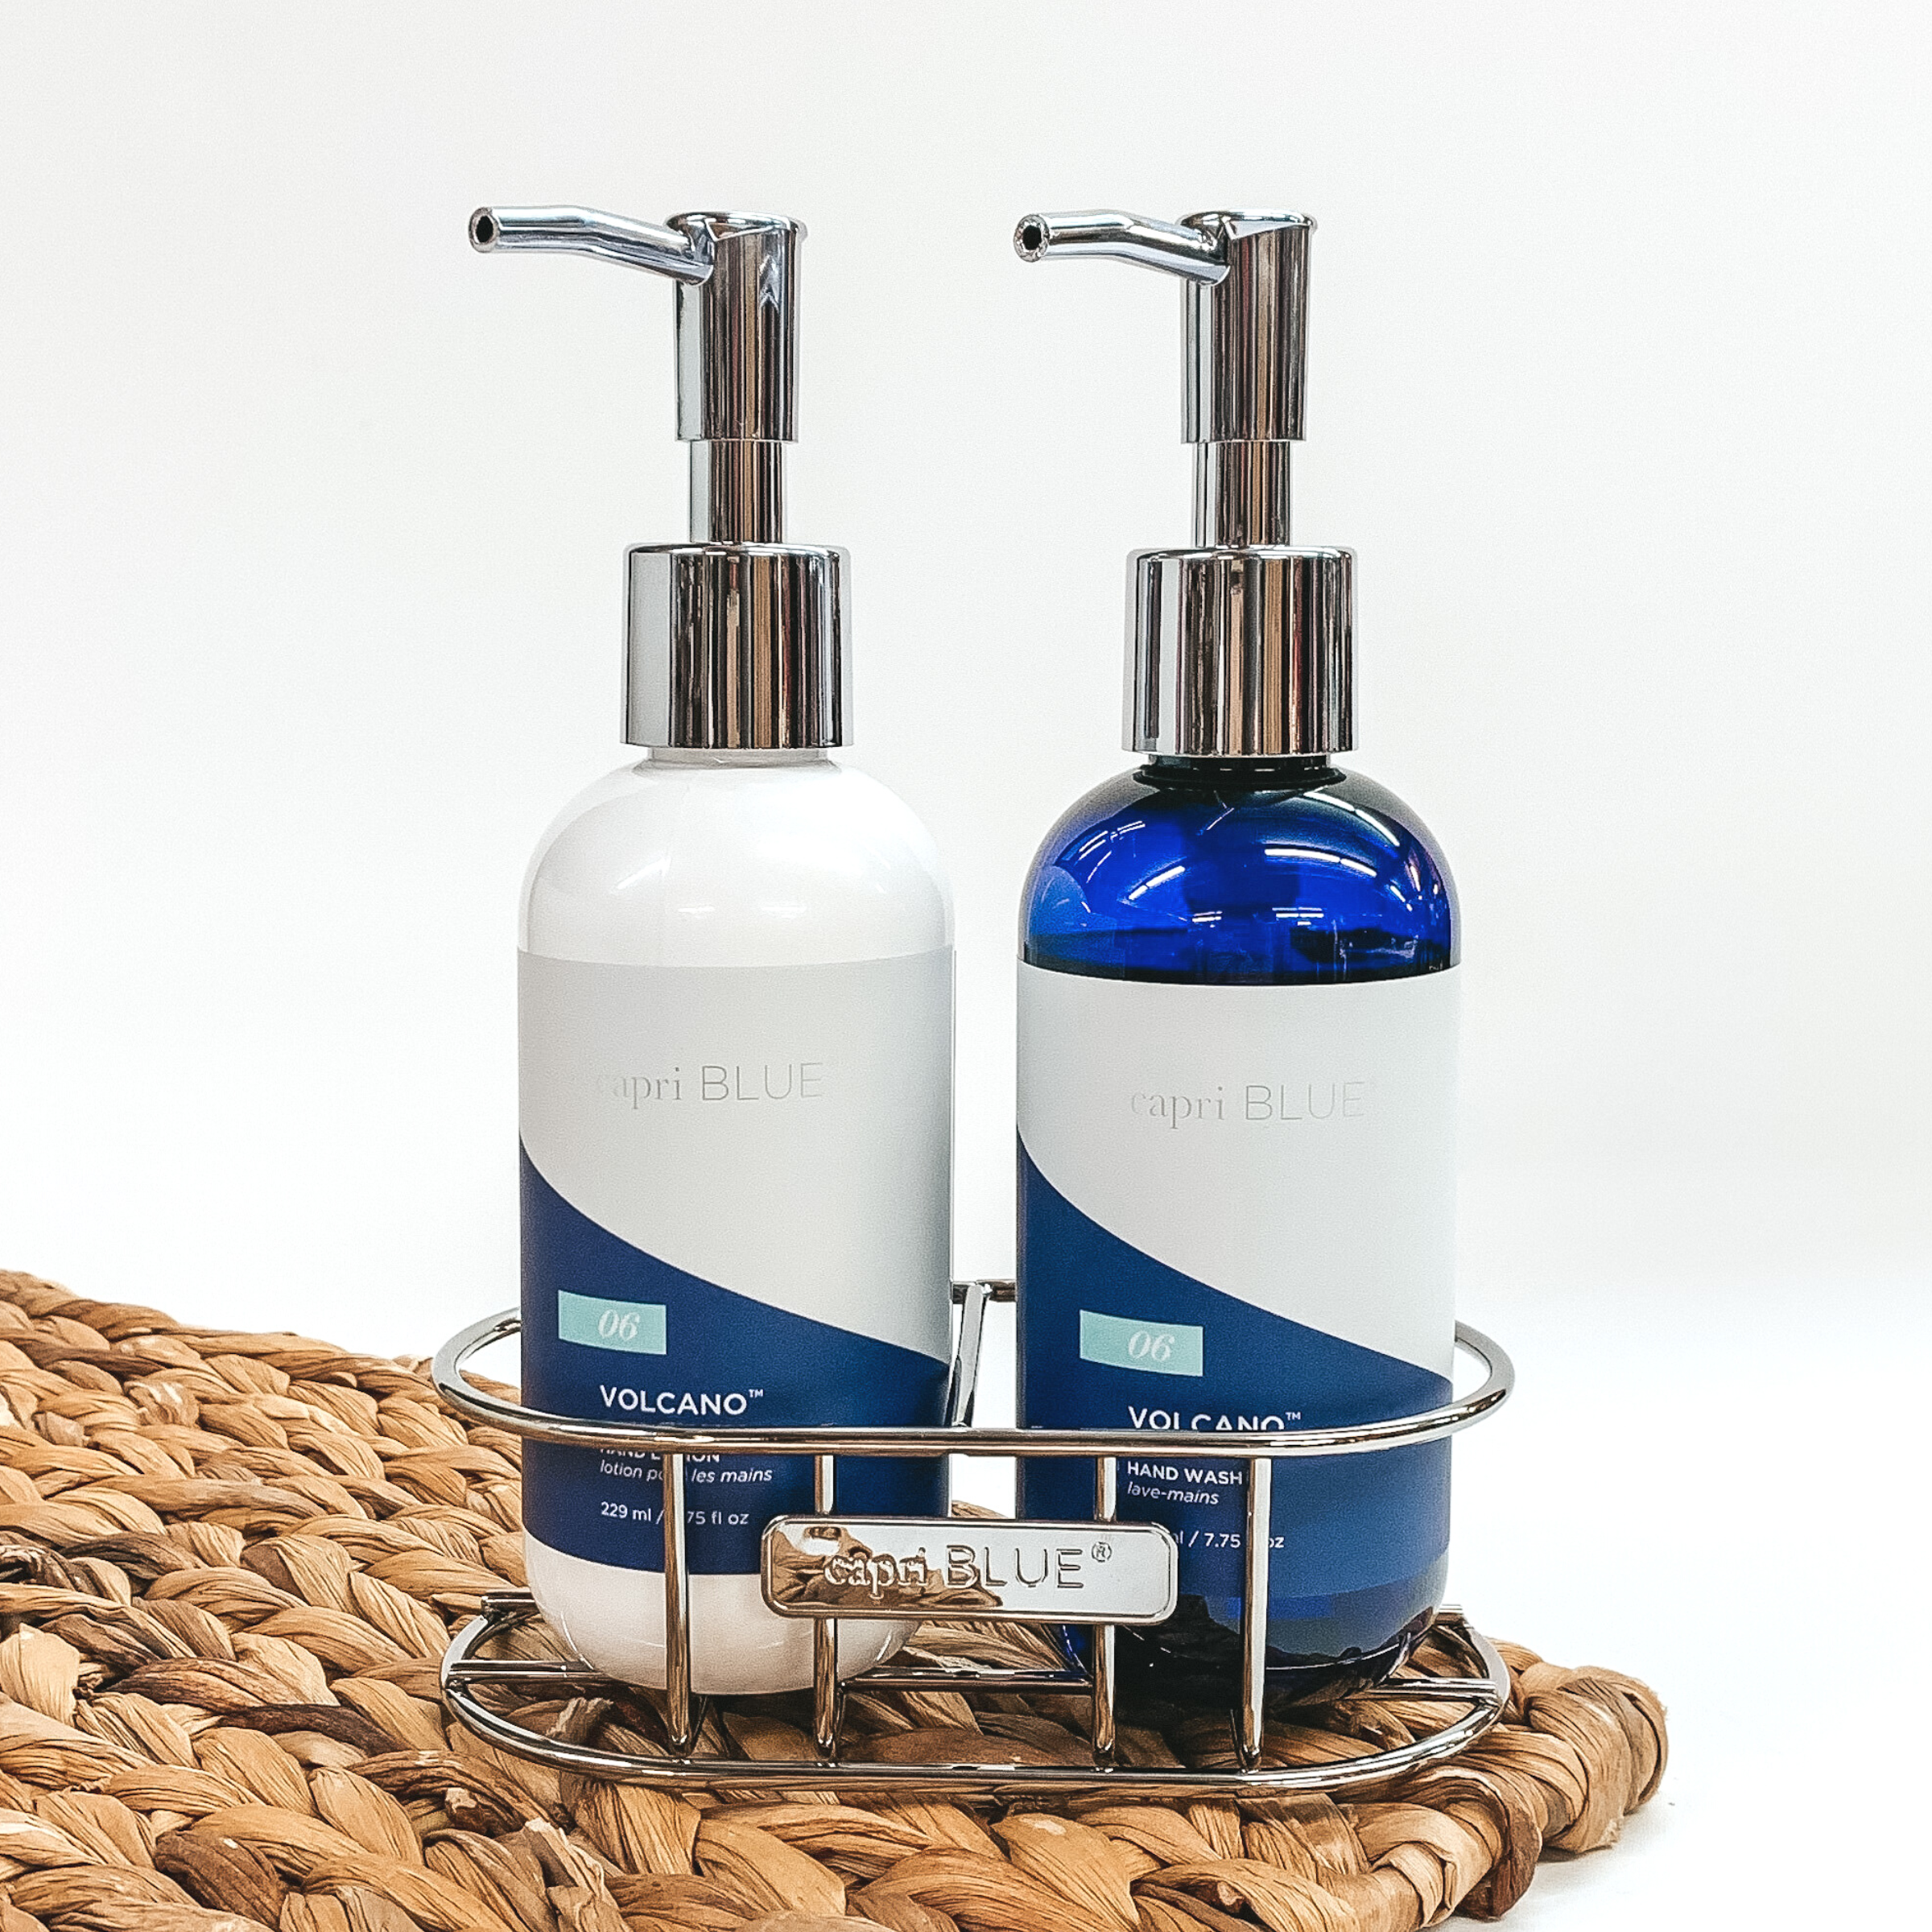 Capri Blue | Volcano Hand Wash and Lotion Set with Shower Caddy